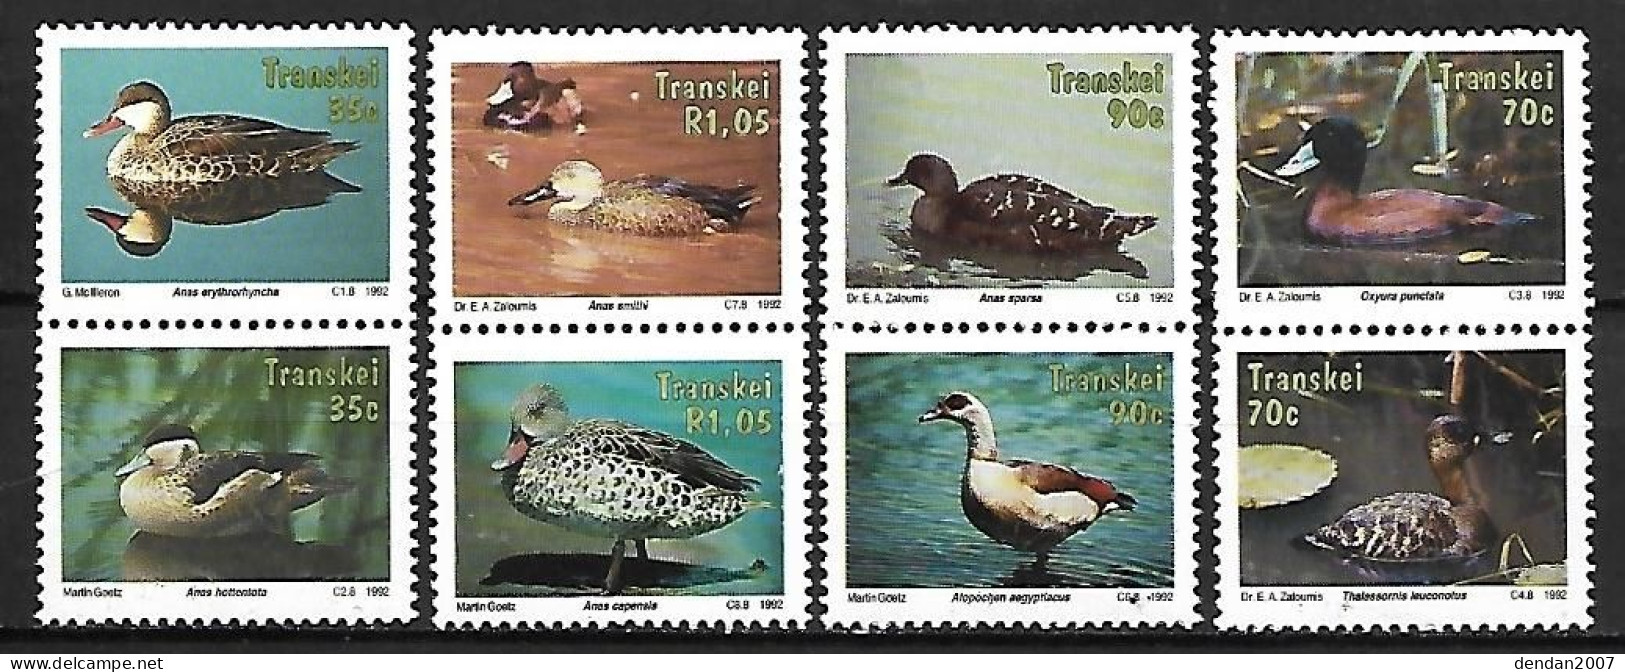 Transkei (South Africa) : MNH ** 1992 Complete Set 8/8 : 8 Different Ducks And Gooses - Águilas & Aves De Presa